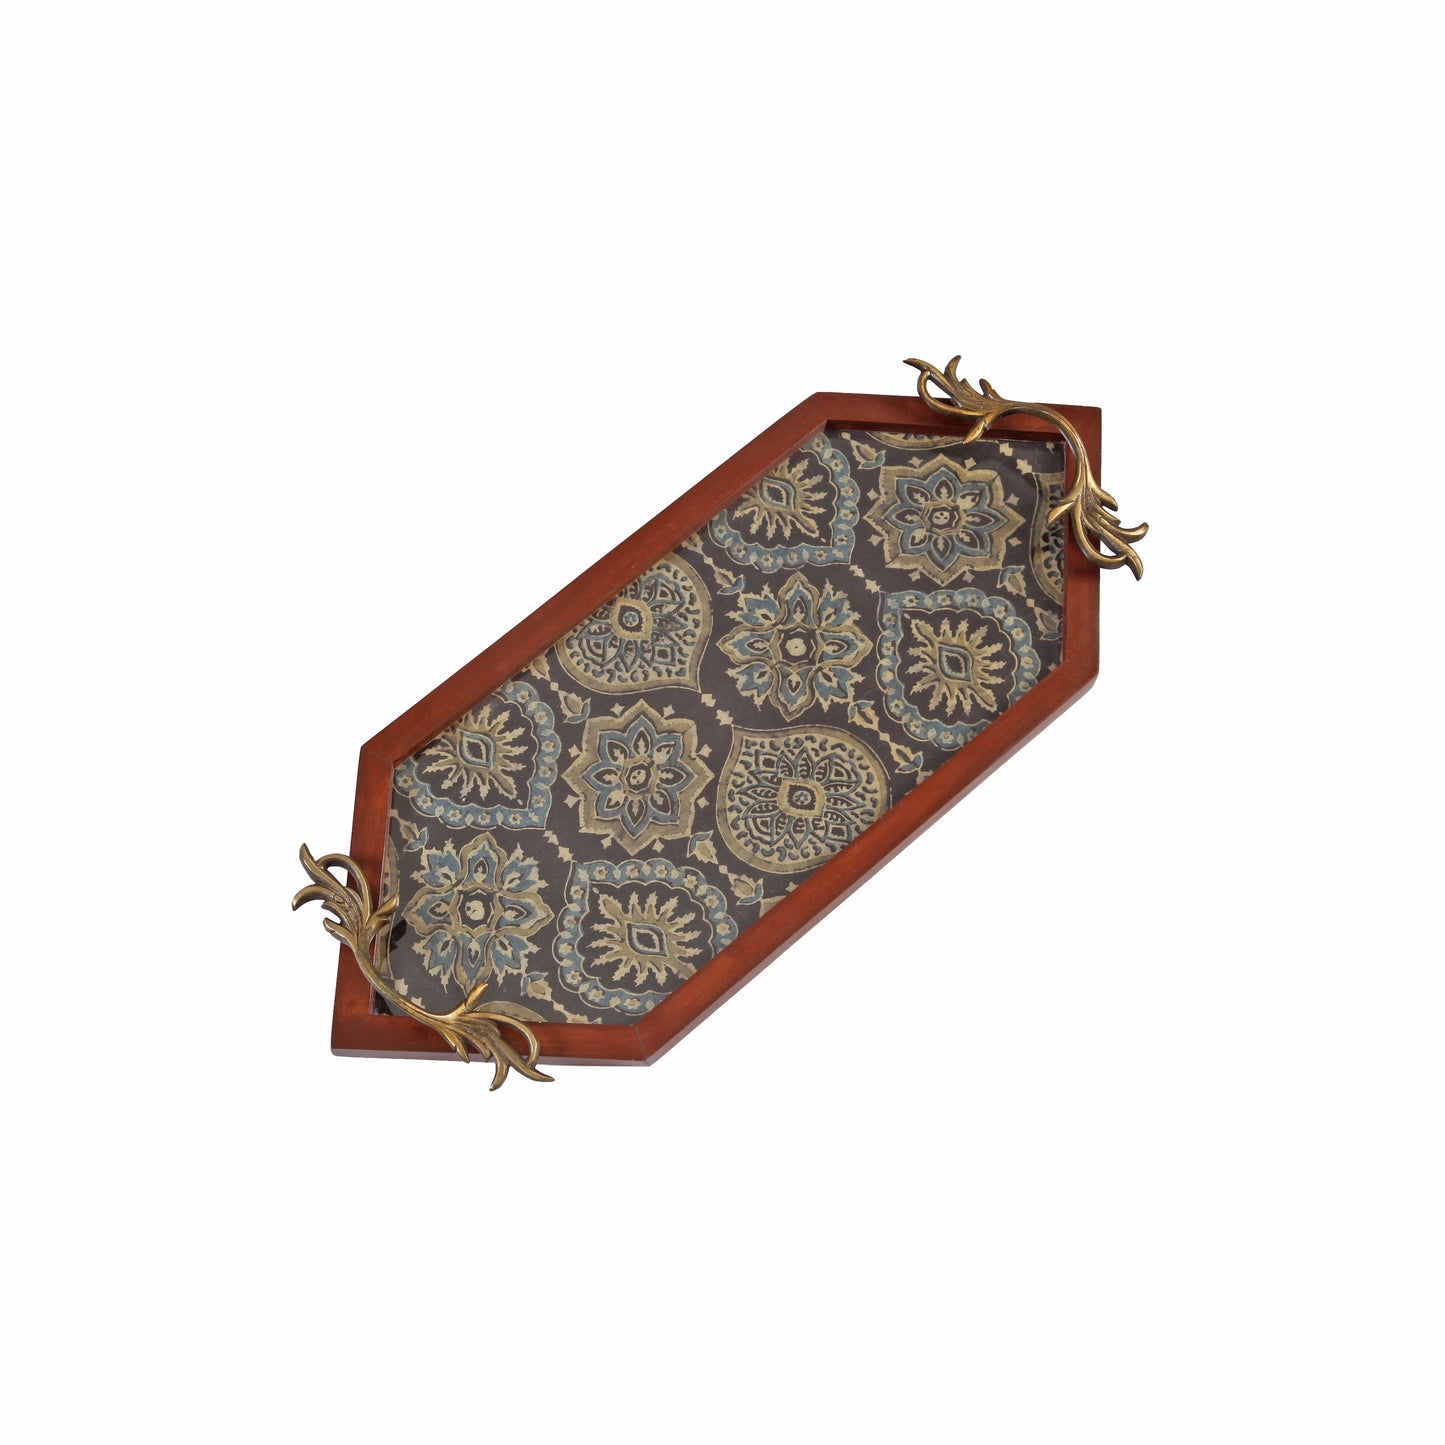 A Tiny Mistake Diamond Shaped Blue Modal Pattern Teak Serving Tray with Brass Handle, Tray for Serving Tea and Snacks, 49 x 20 x 2 cm